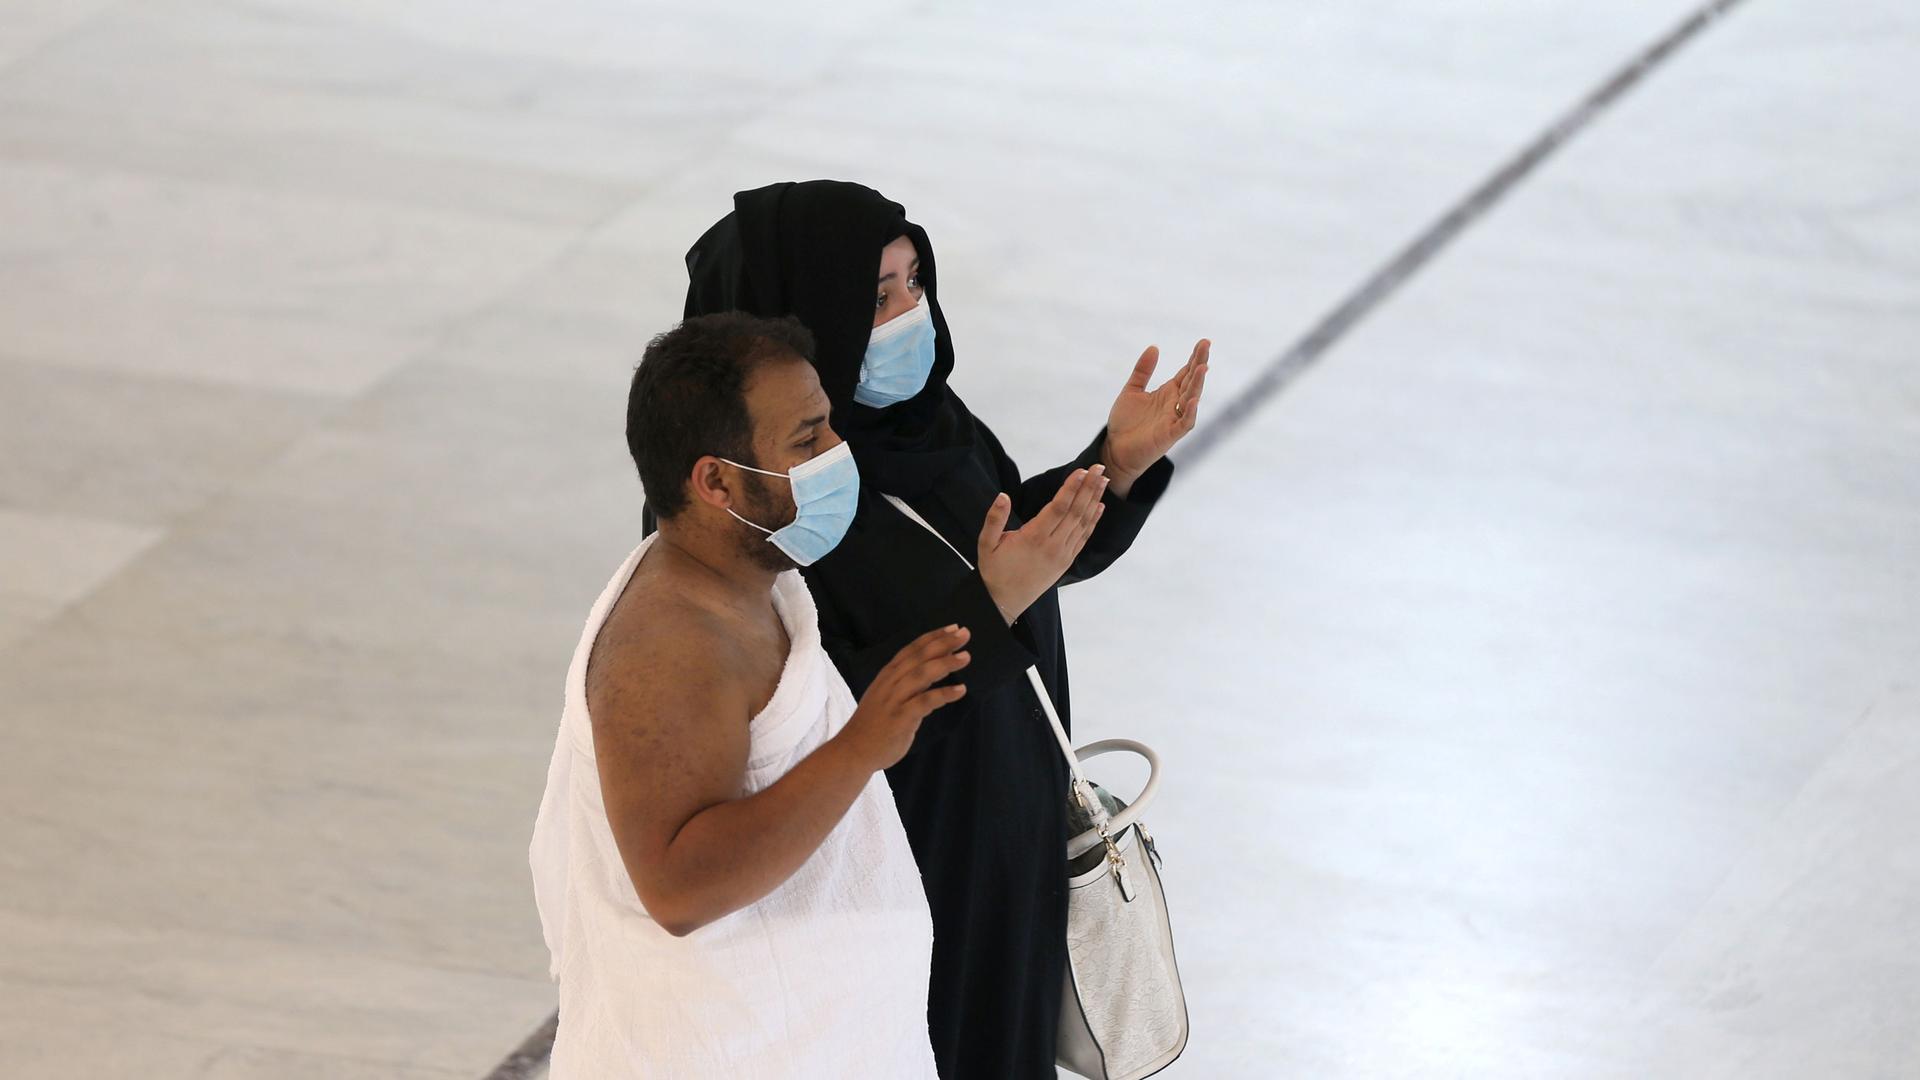 A man and woman are shown standing with their hands in the air and wearing face masks.